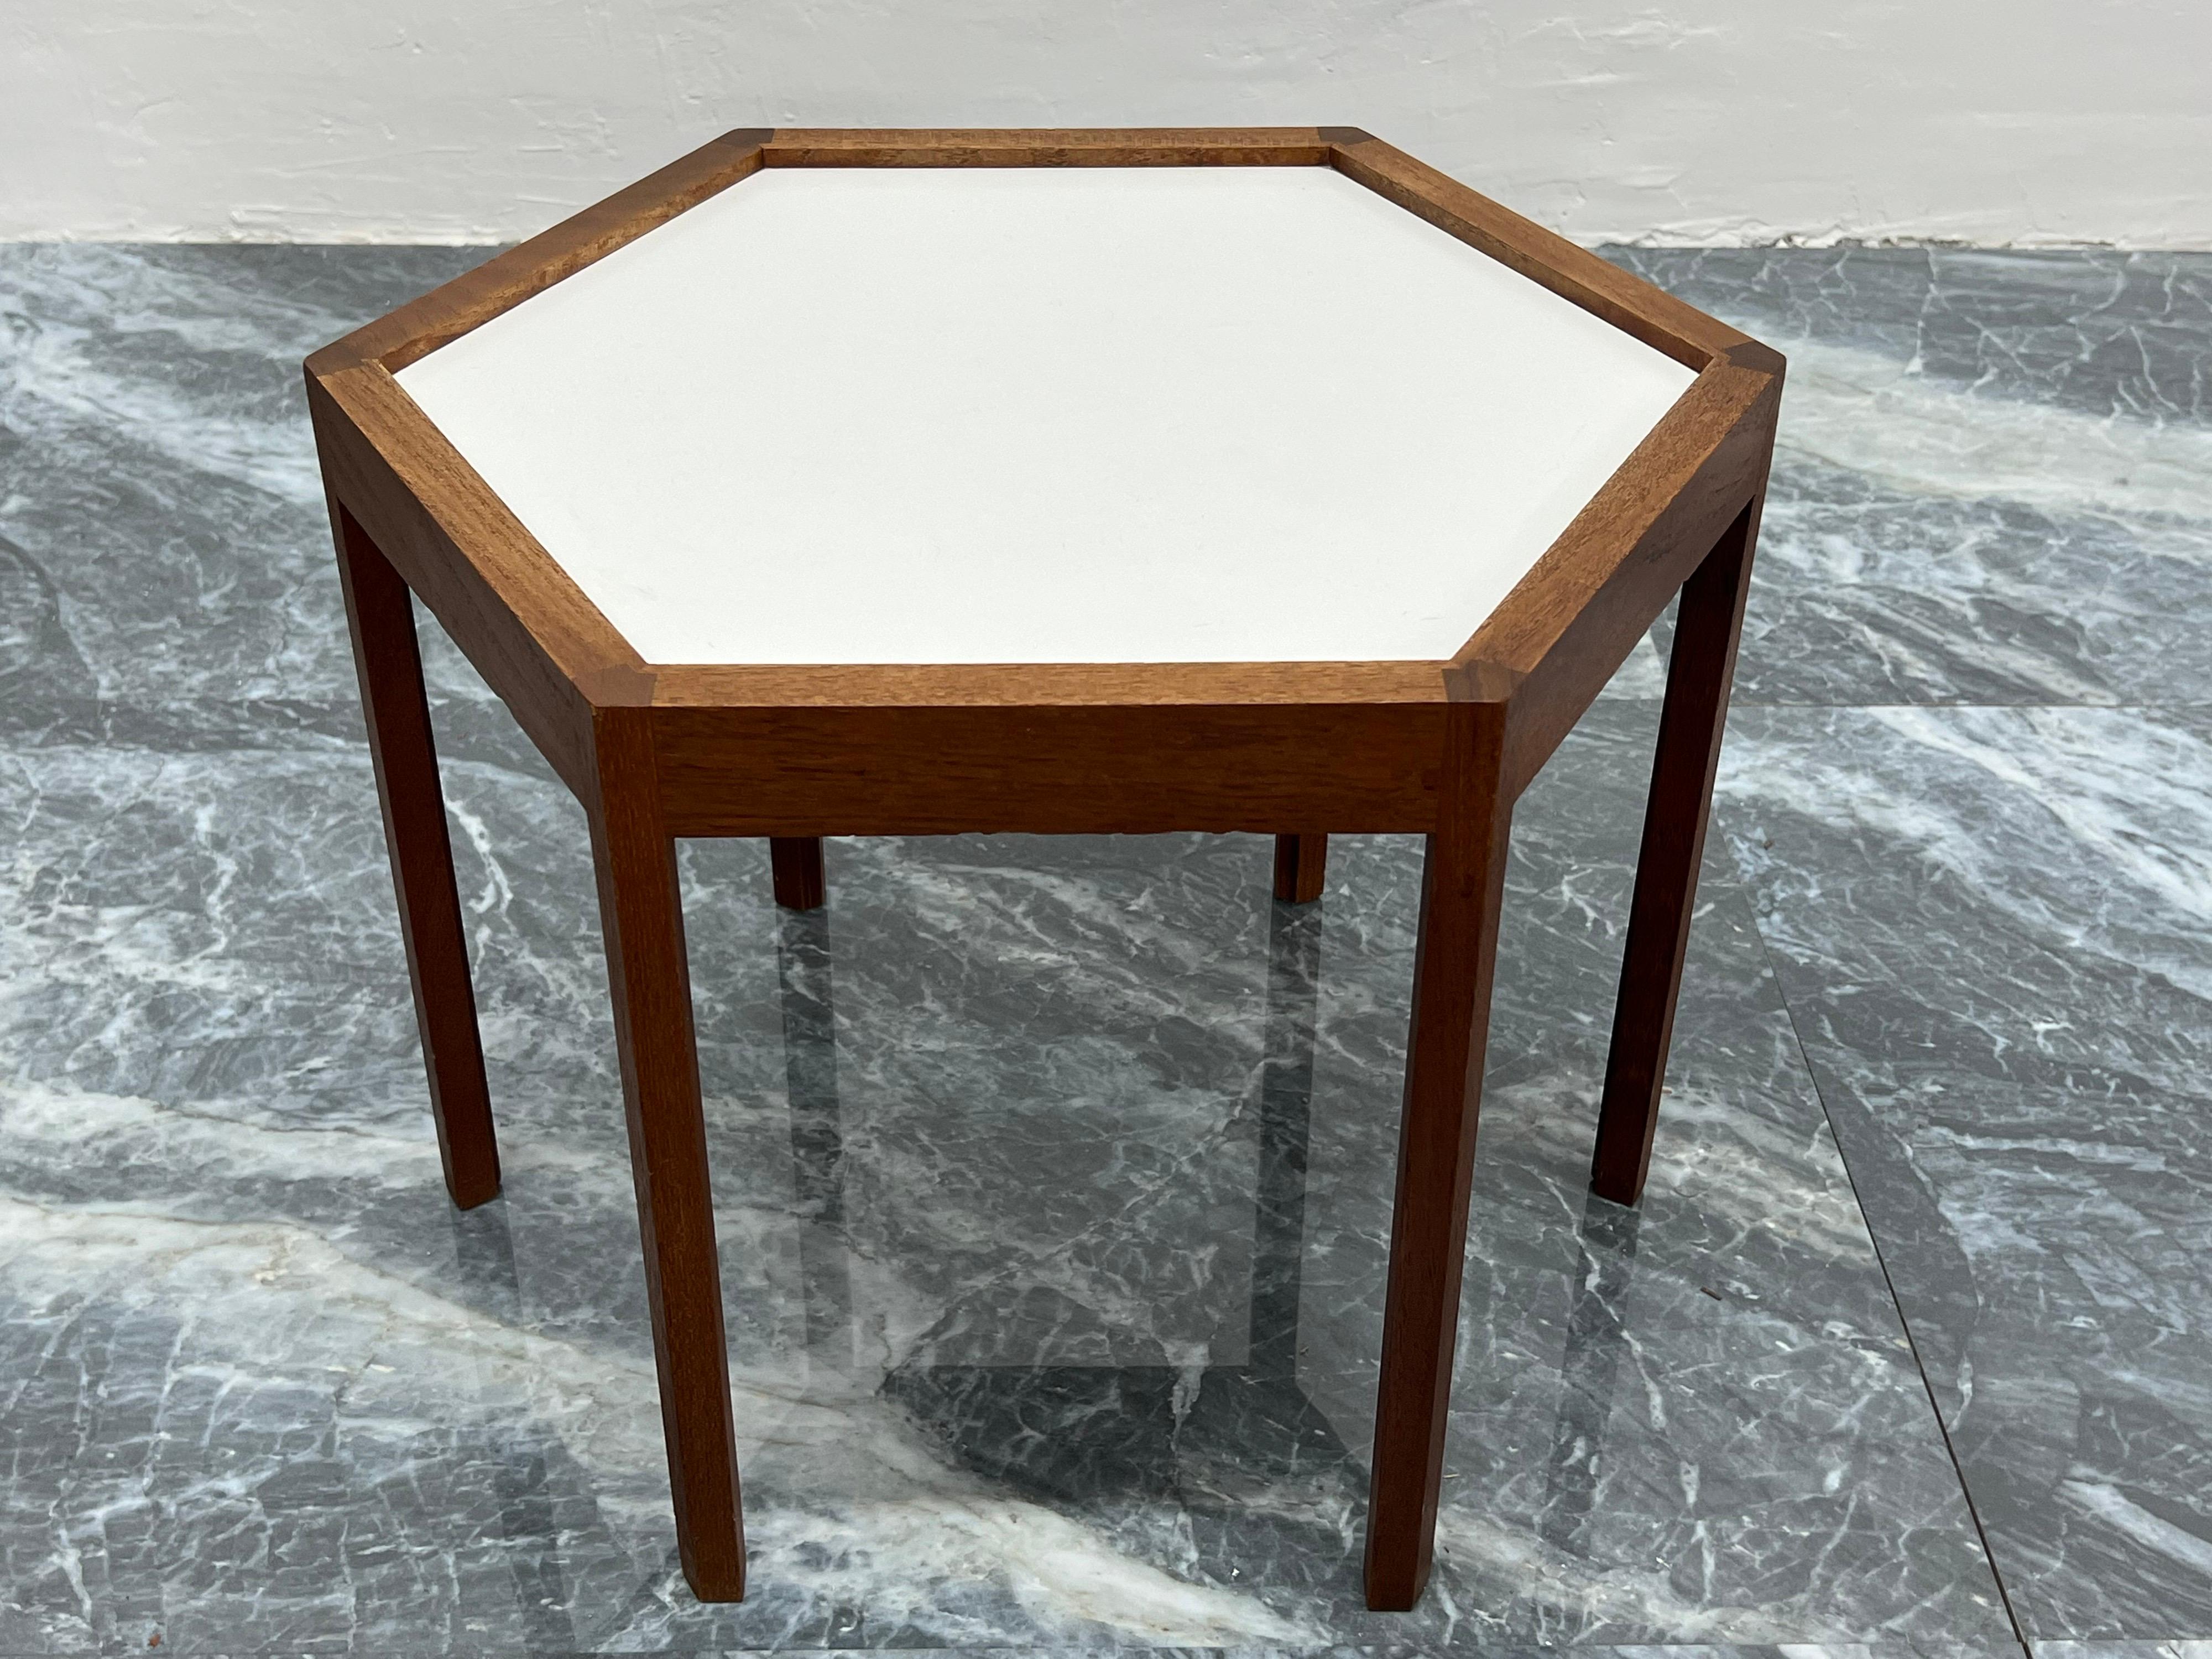 Hans C. Andersen Hexagonal Rosewood and White Laminate Danish Side Table, 1960s For Sale 3